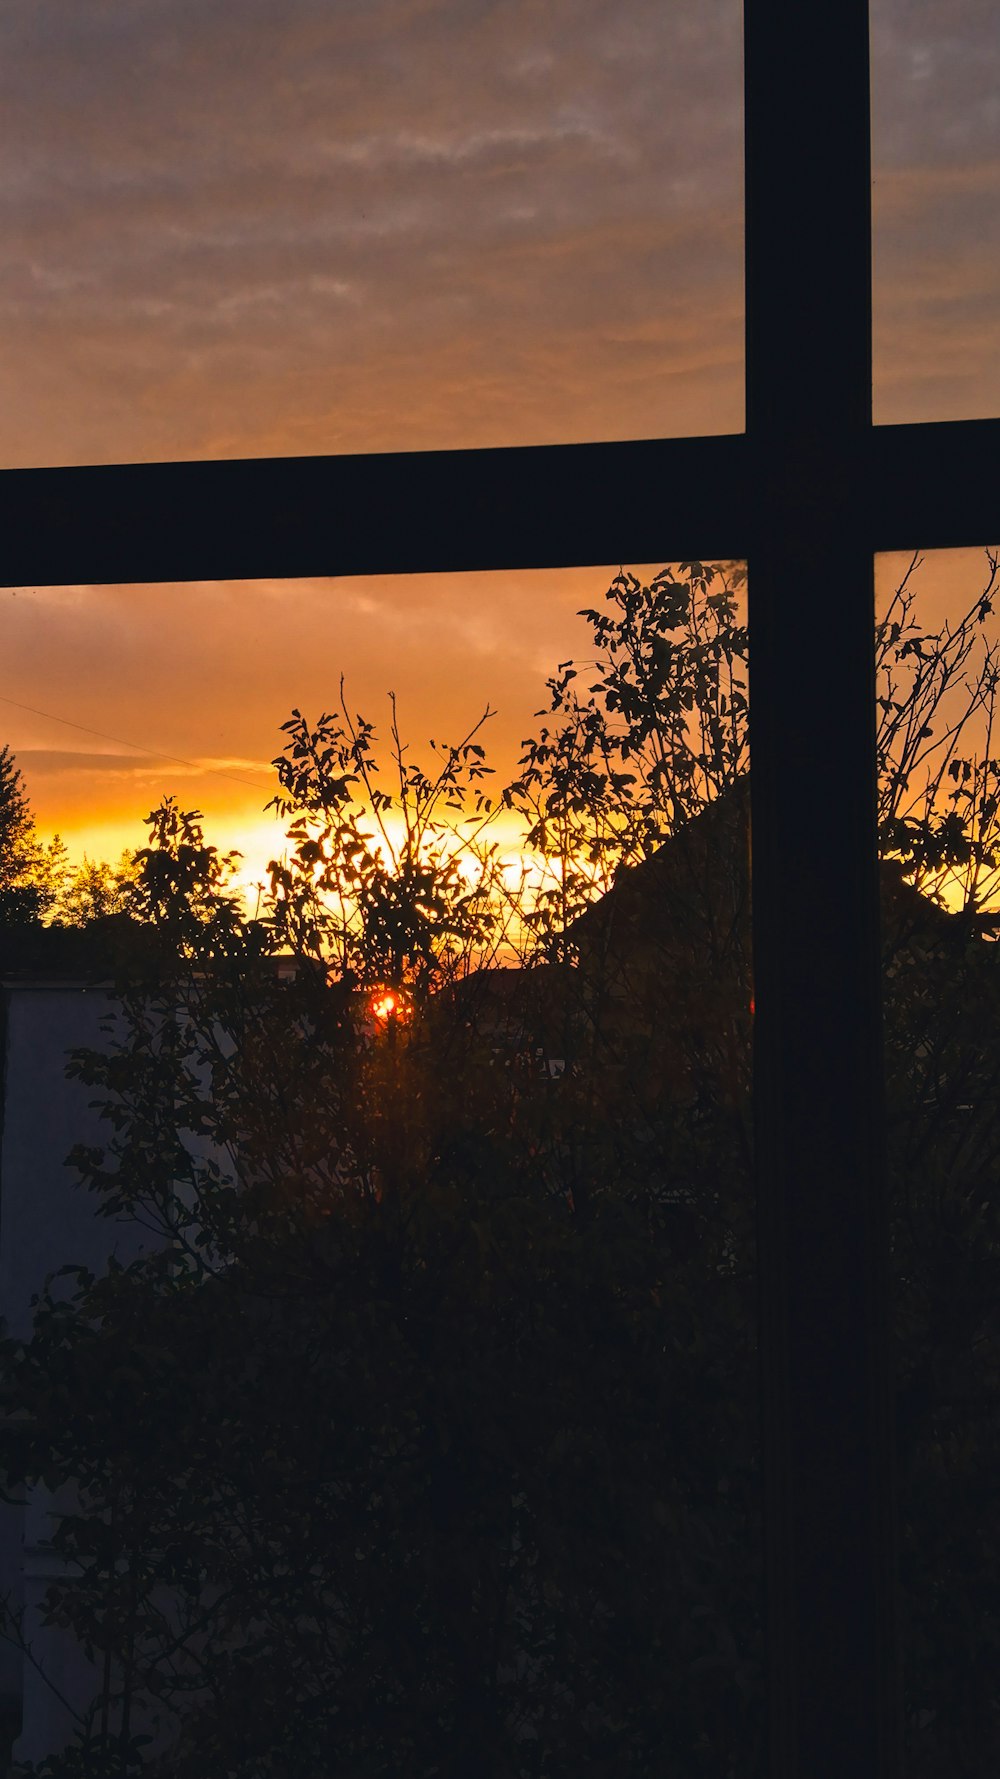 a sunset seen through a window with a cross in the foreground